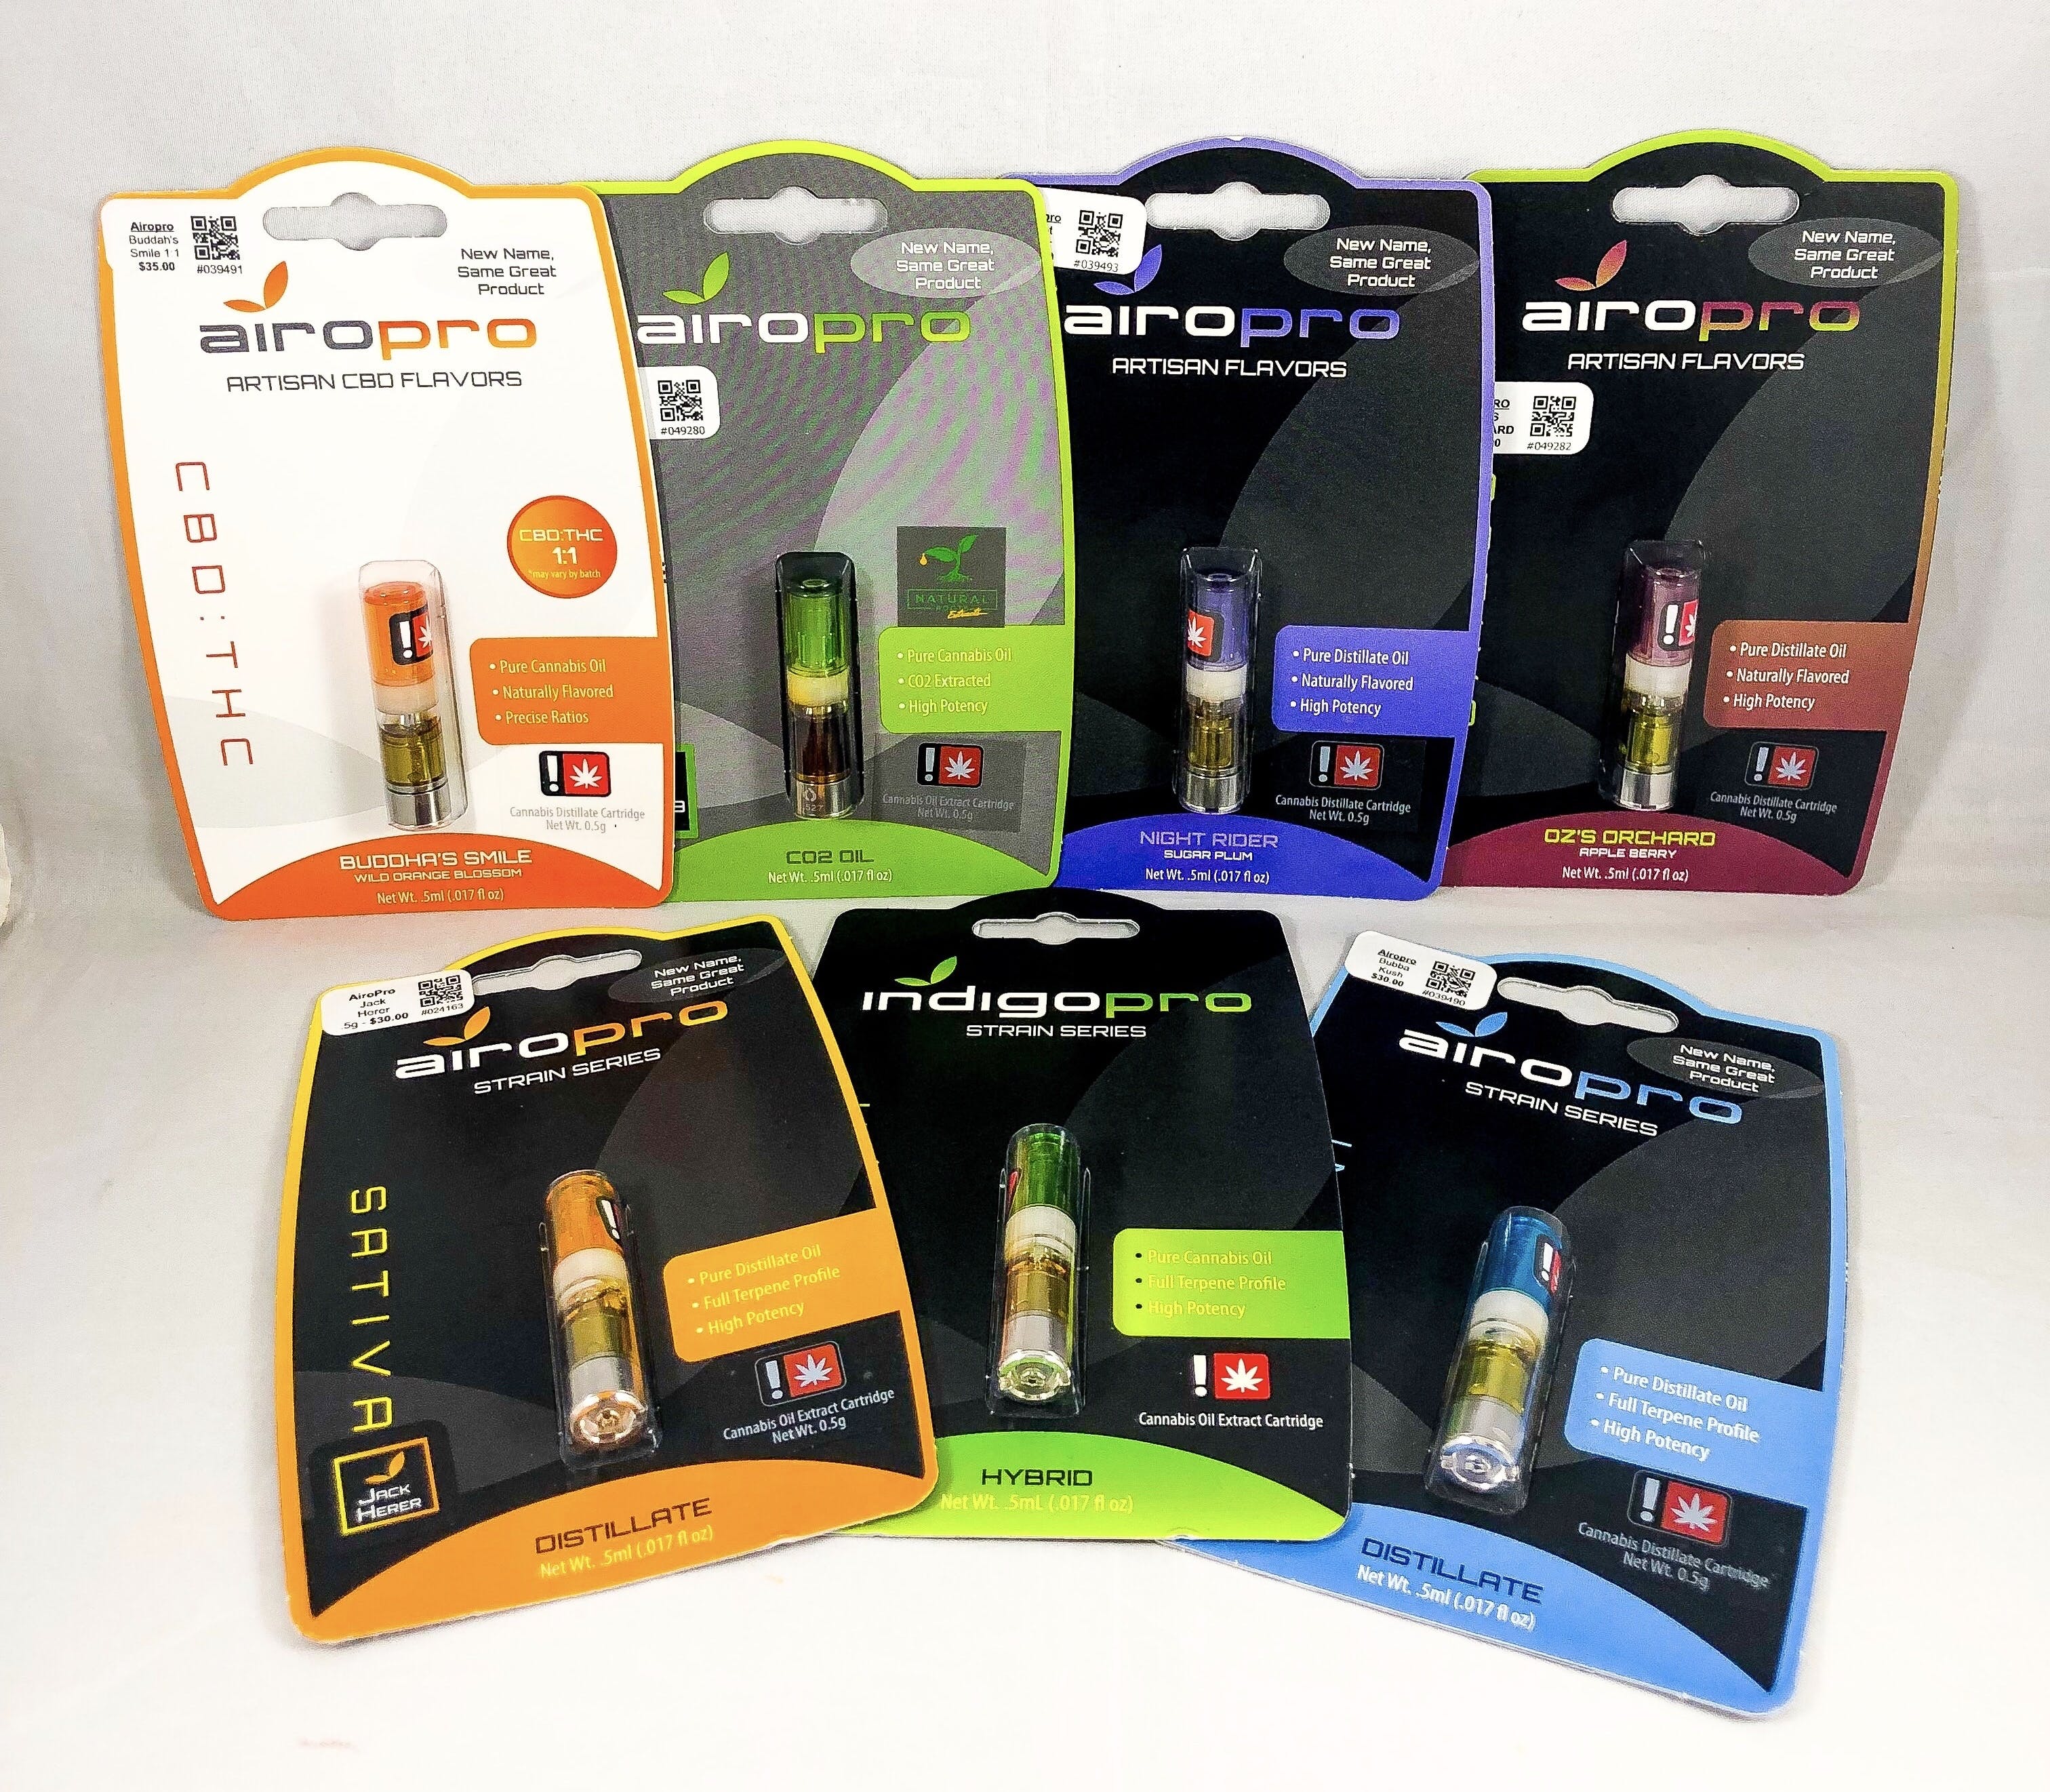 concentrate-airopro-jack-herer-cartridge